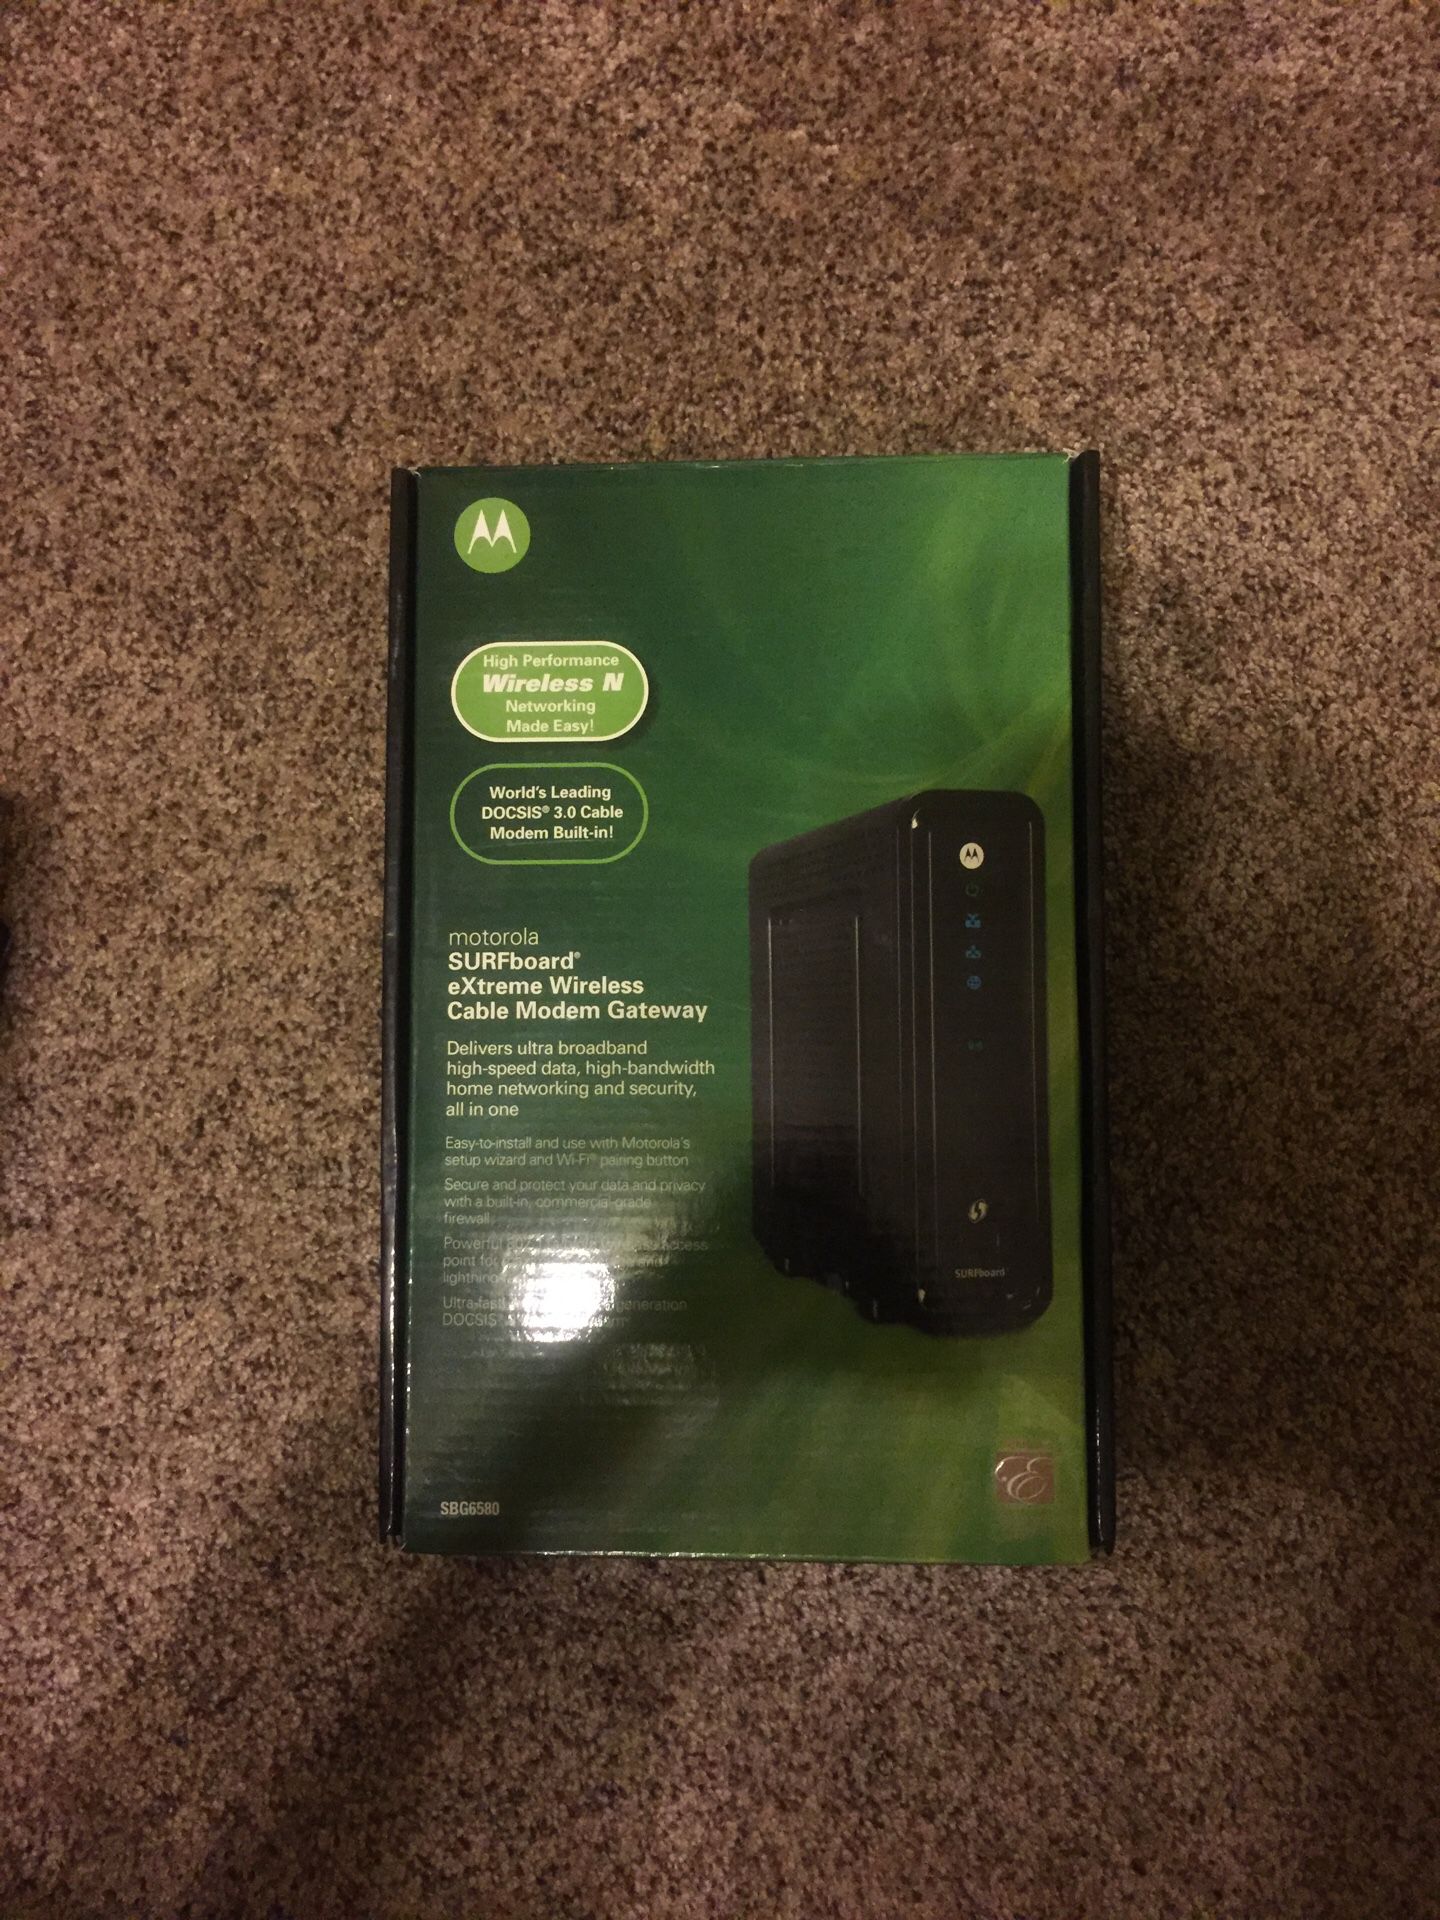 Motorola Surfboard eXtreme wireless cable modem